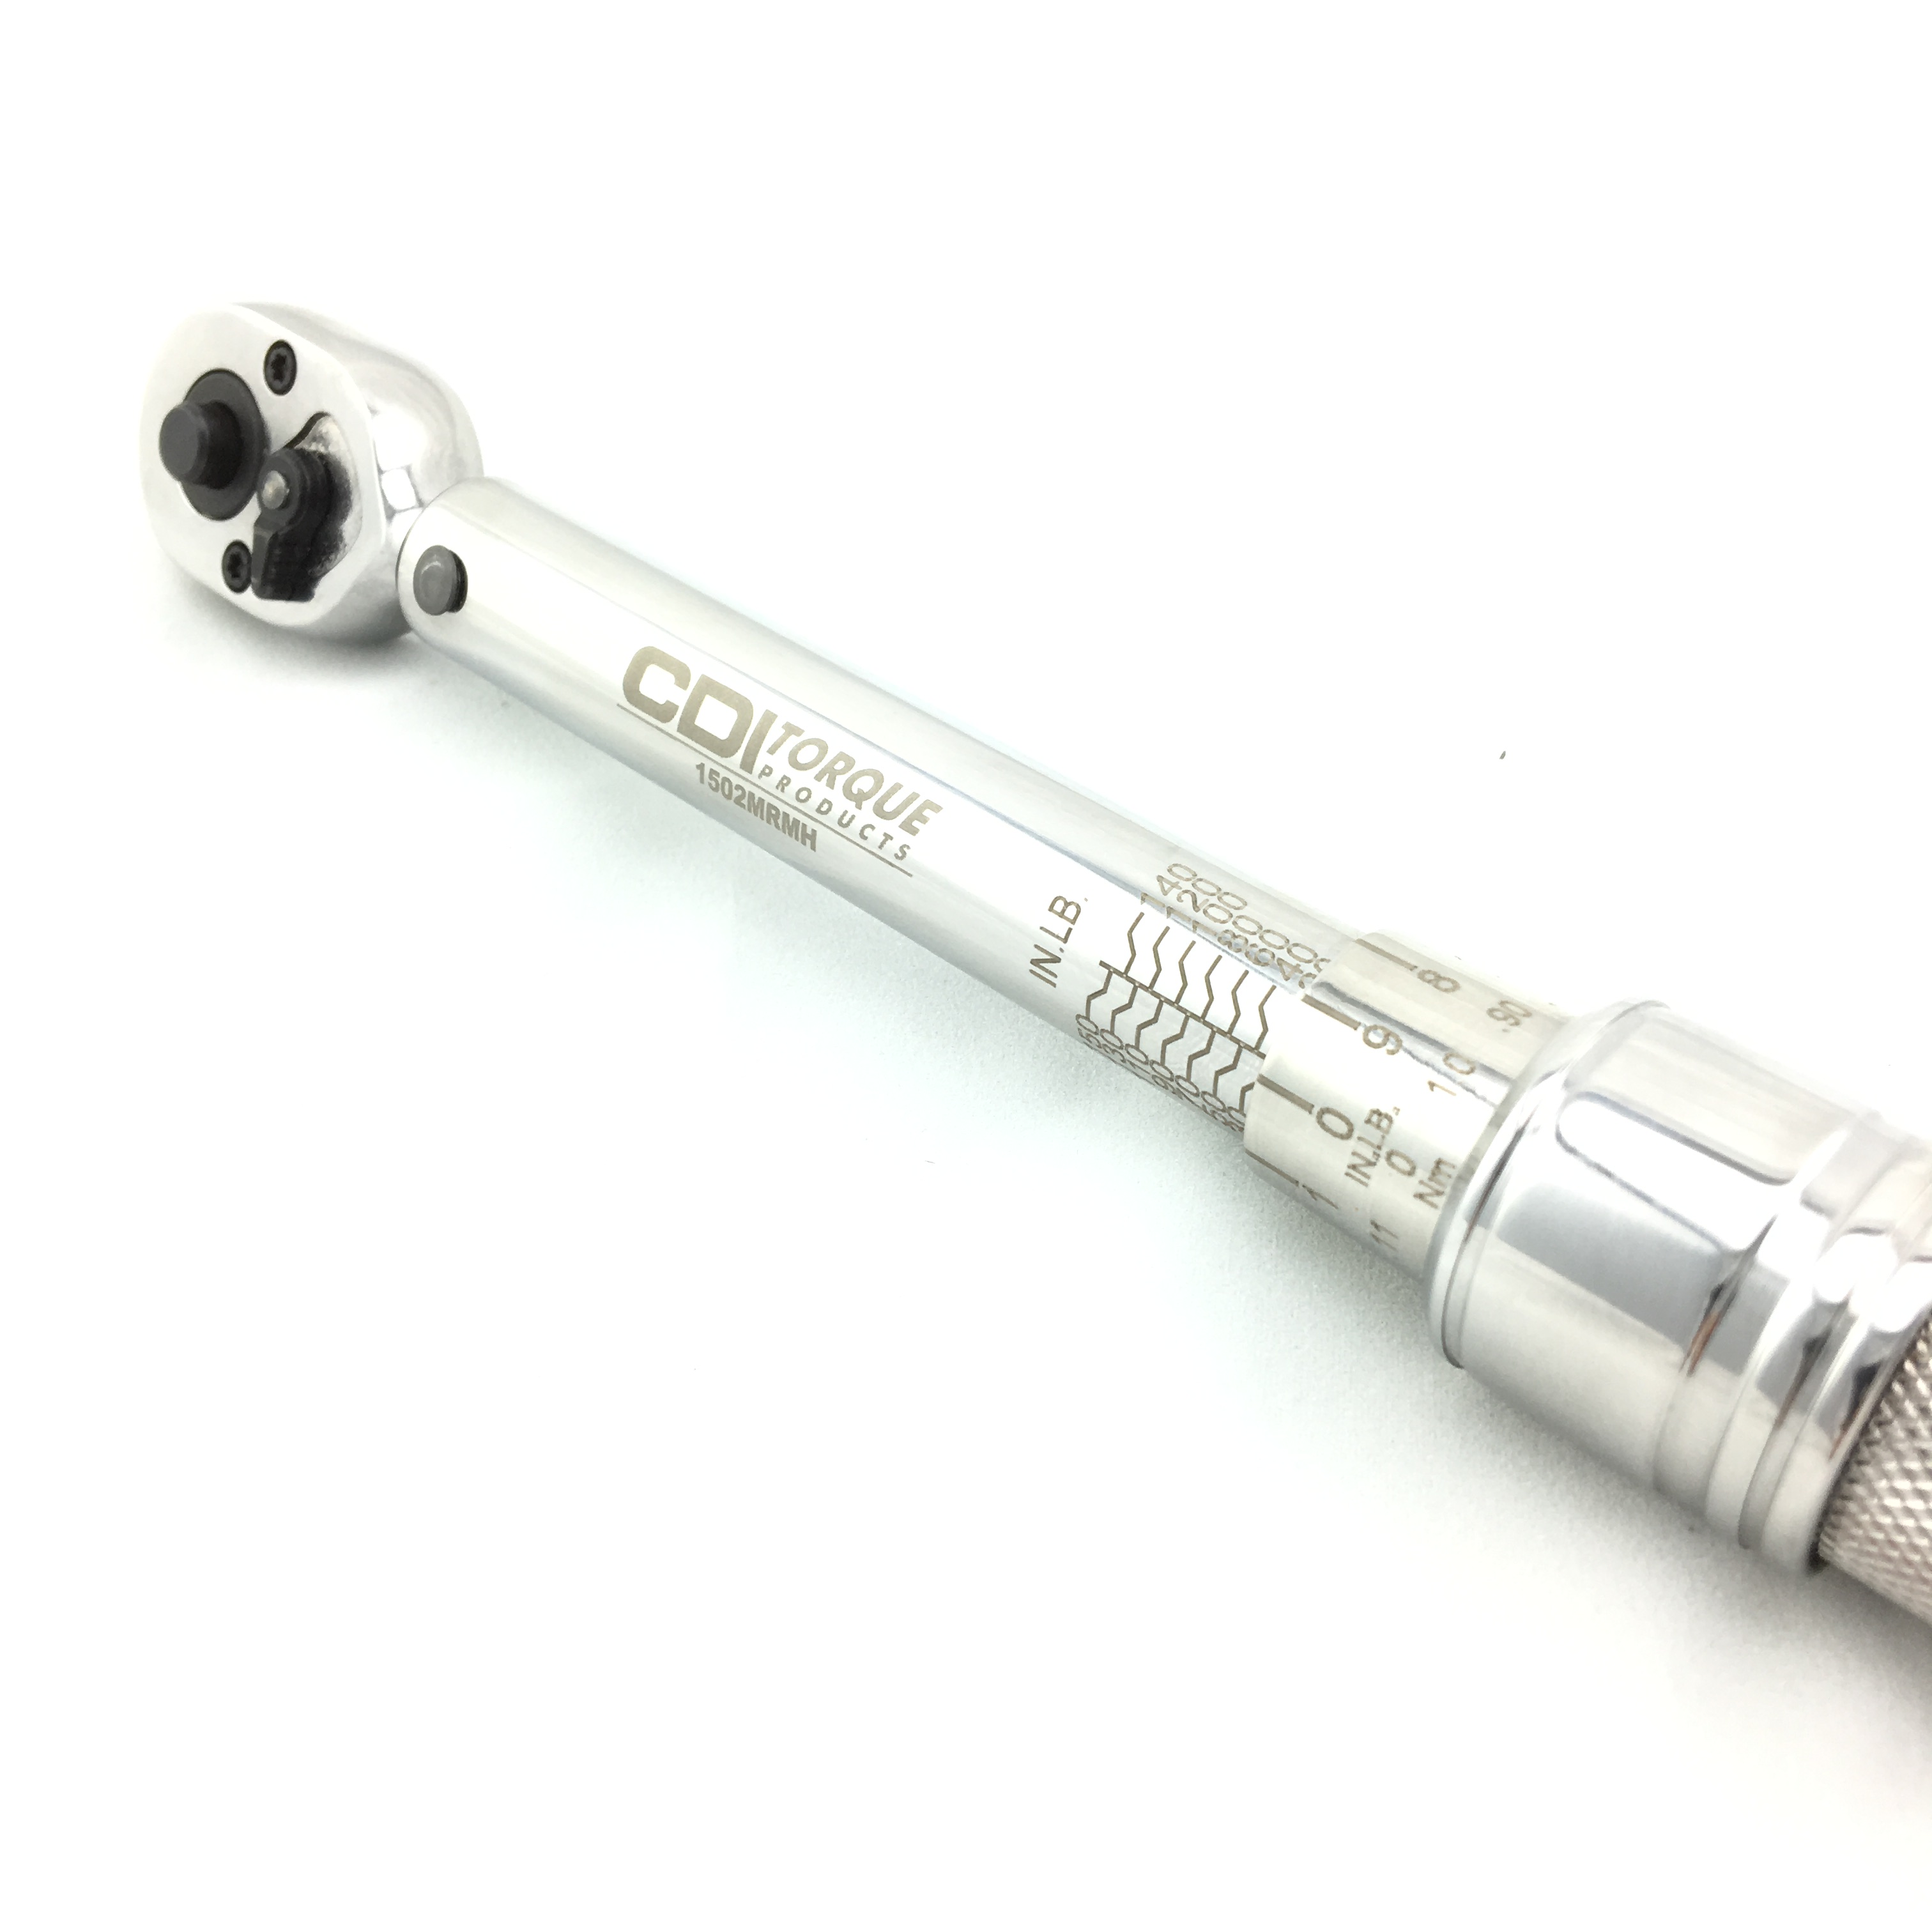 CDI CLICKTYPE TORQUE WRENCH - Tool Testing Lab Inc.